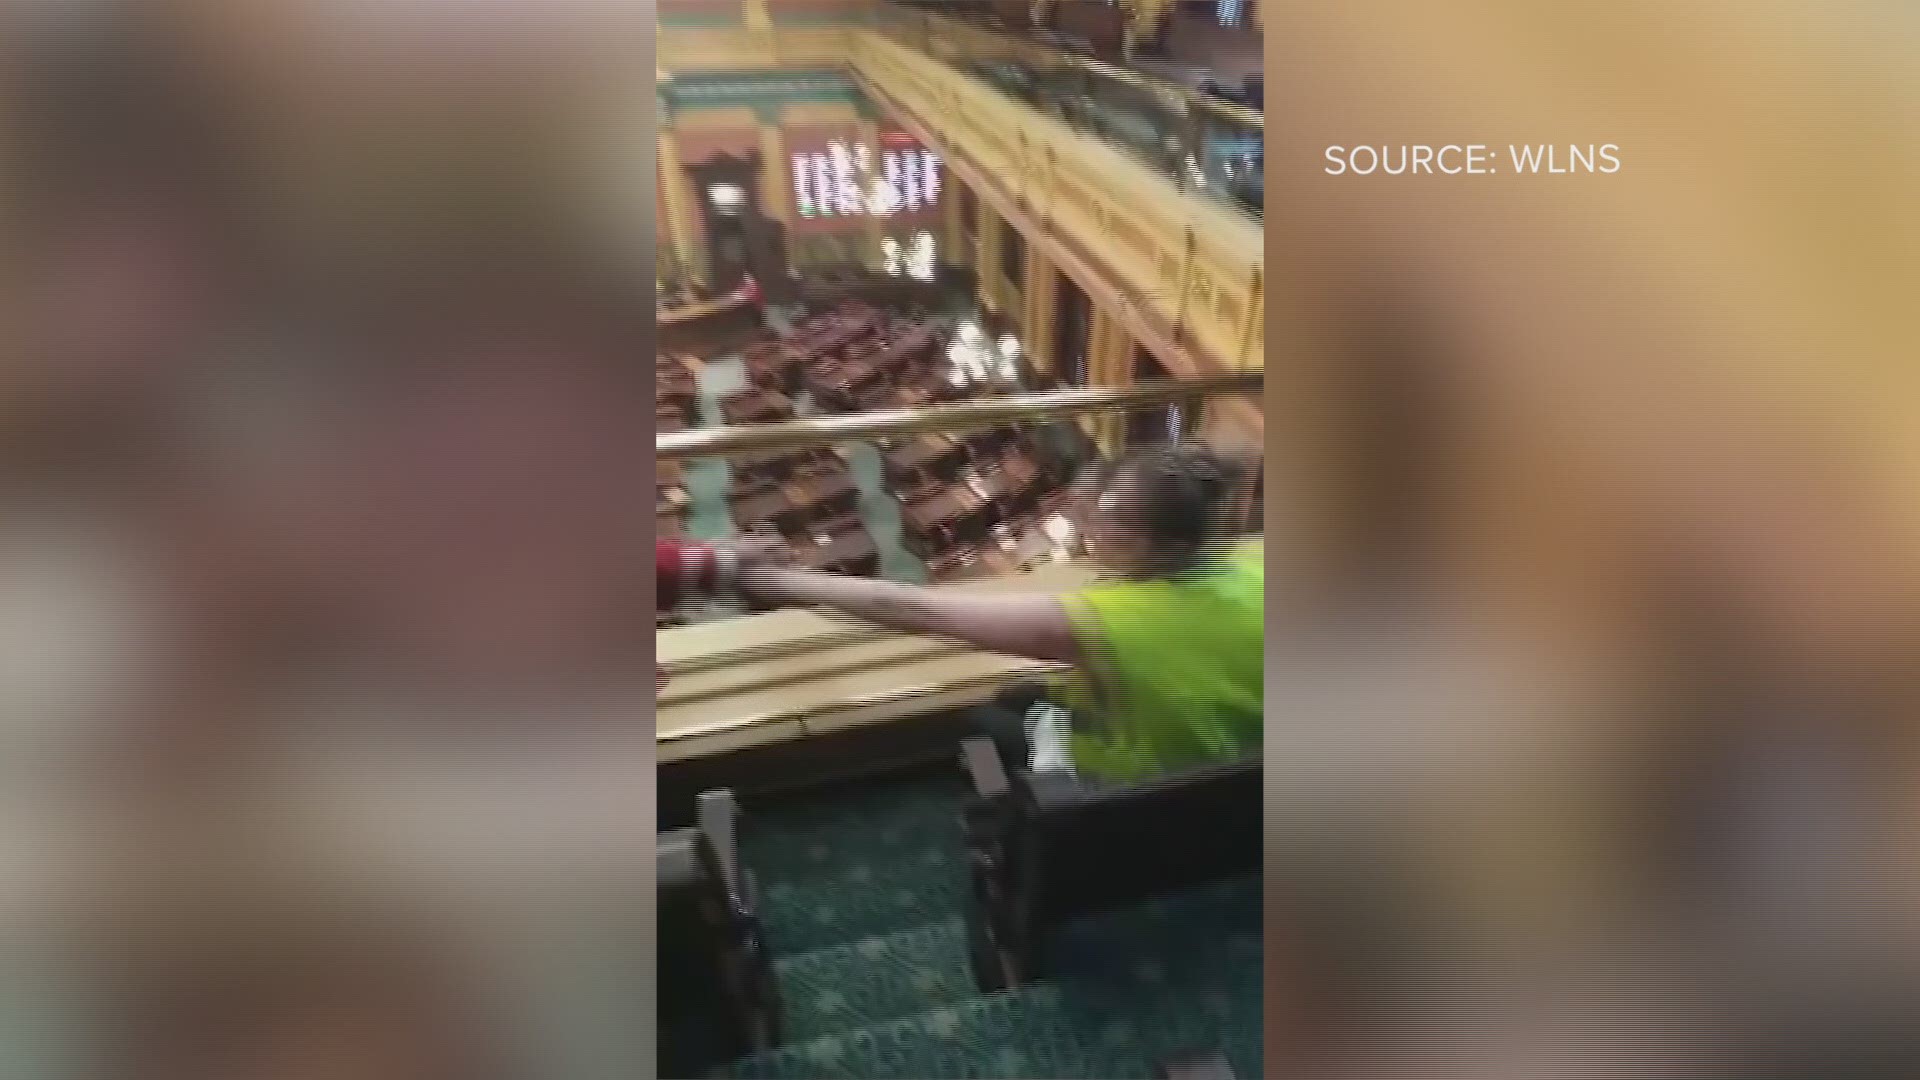 A small group of protesters chanted "Open Michigan now" from the gallery of the House of Representatives before being removed on Wednesday, according to WLNS.